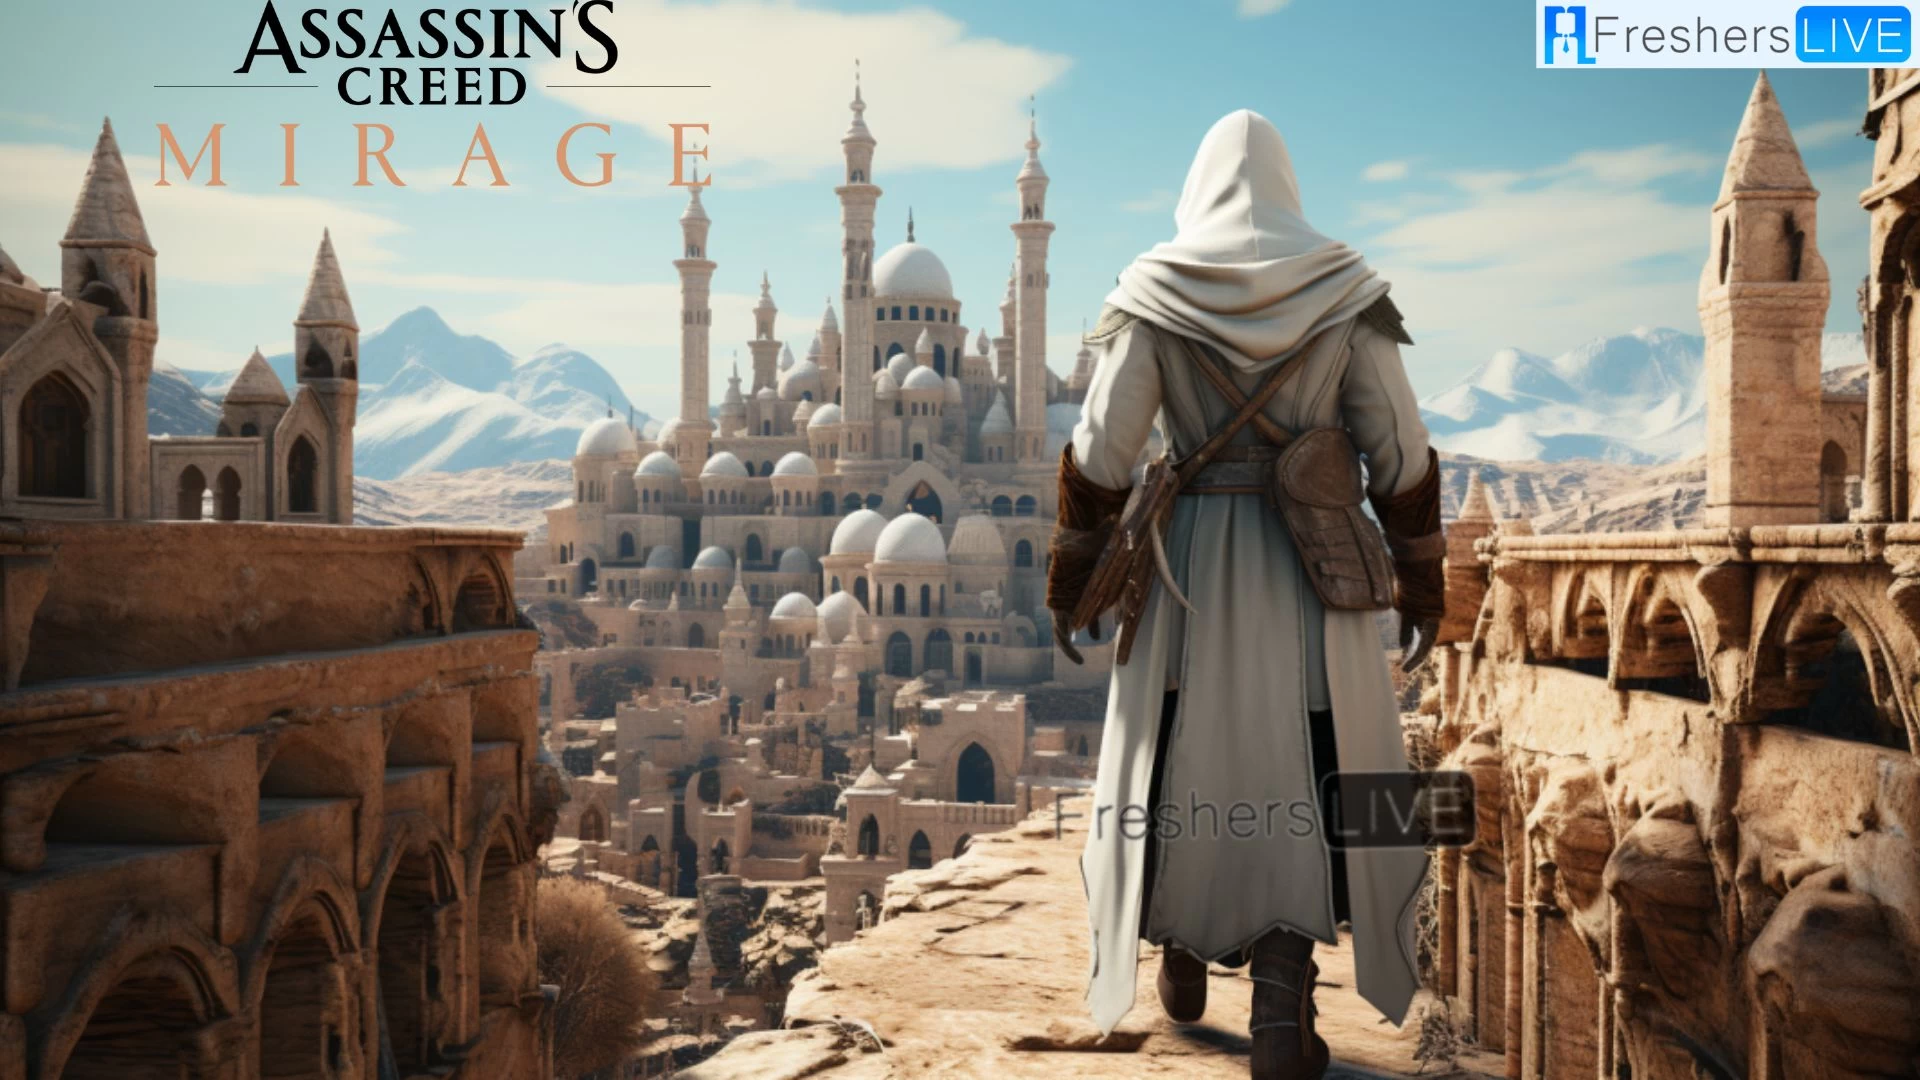 How Long is Assassin's Creed Mirage? Find Out Here